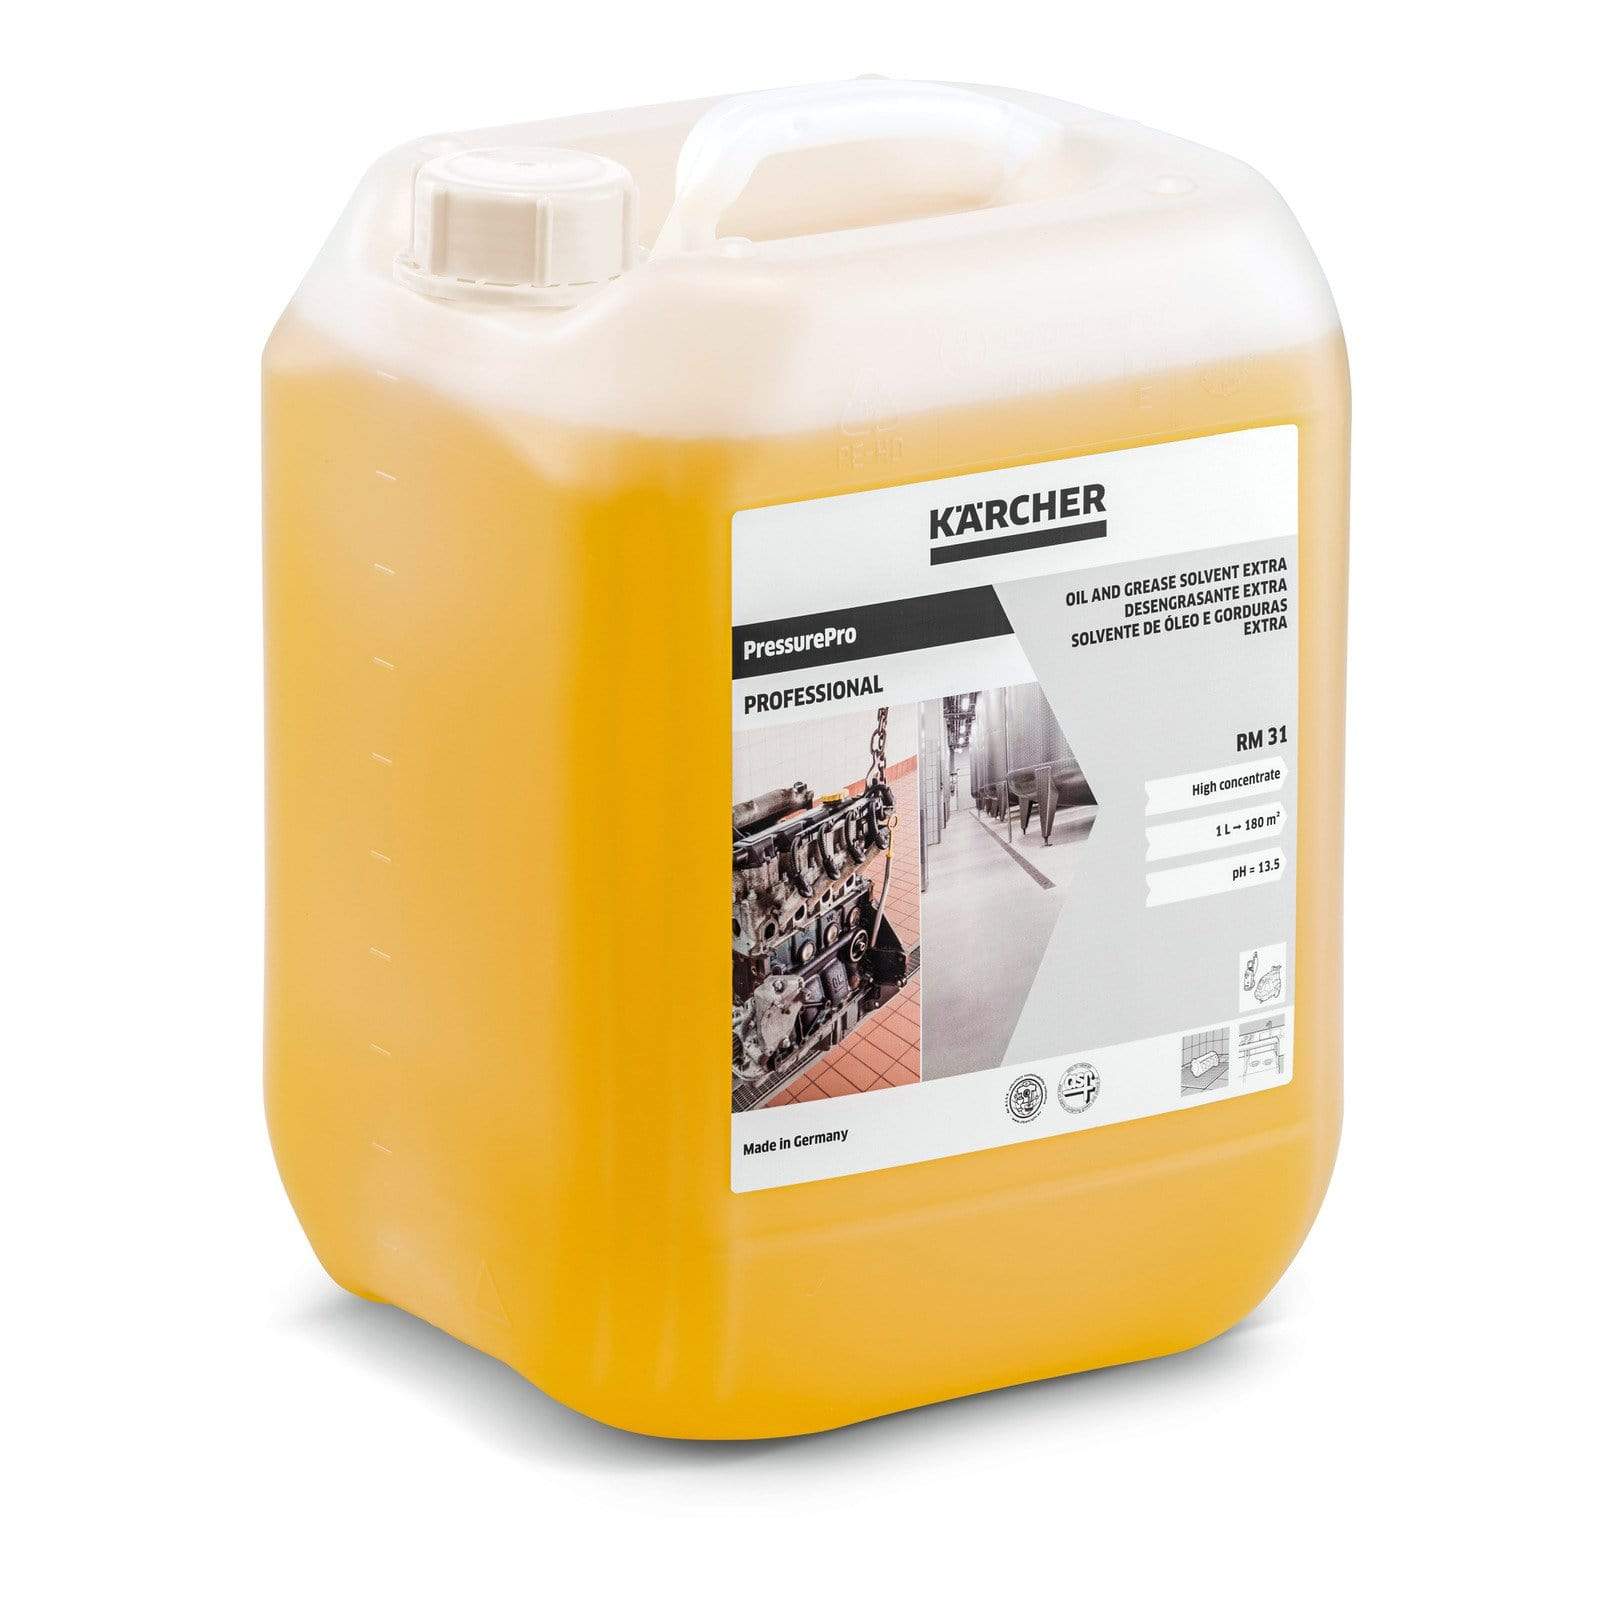 Karcher PressurePro Oil and Grease Cleaner Extra RM 31, 10L | Supply Master | Accra, Ghana Tools Building Steel Engineering Hardware tool